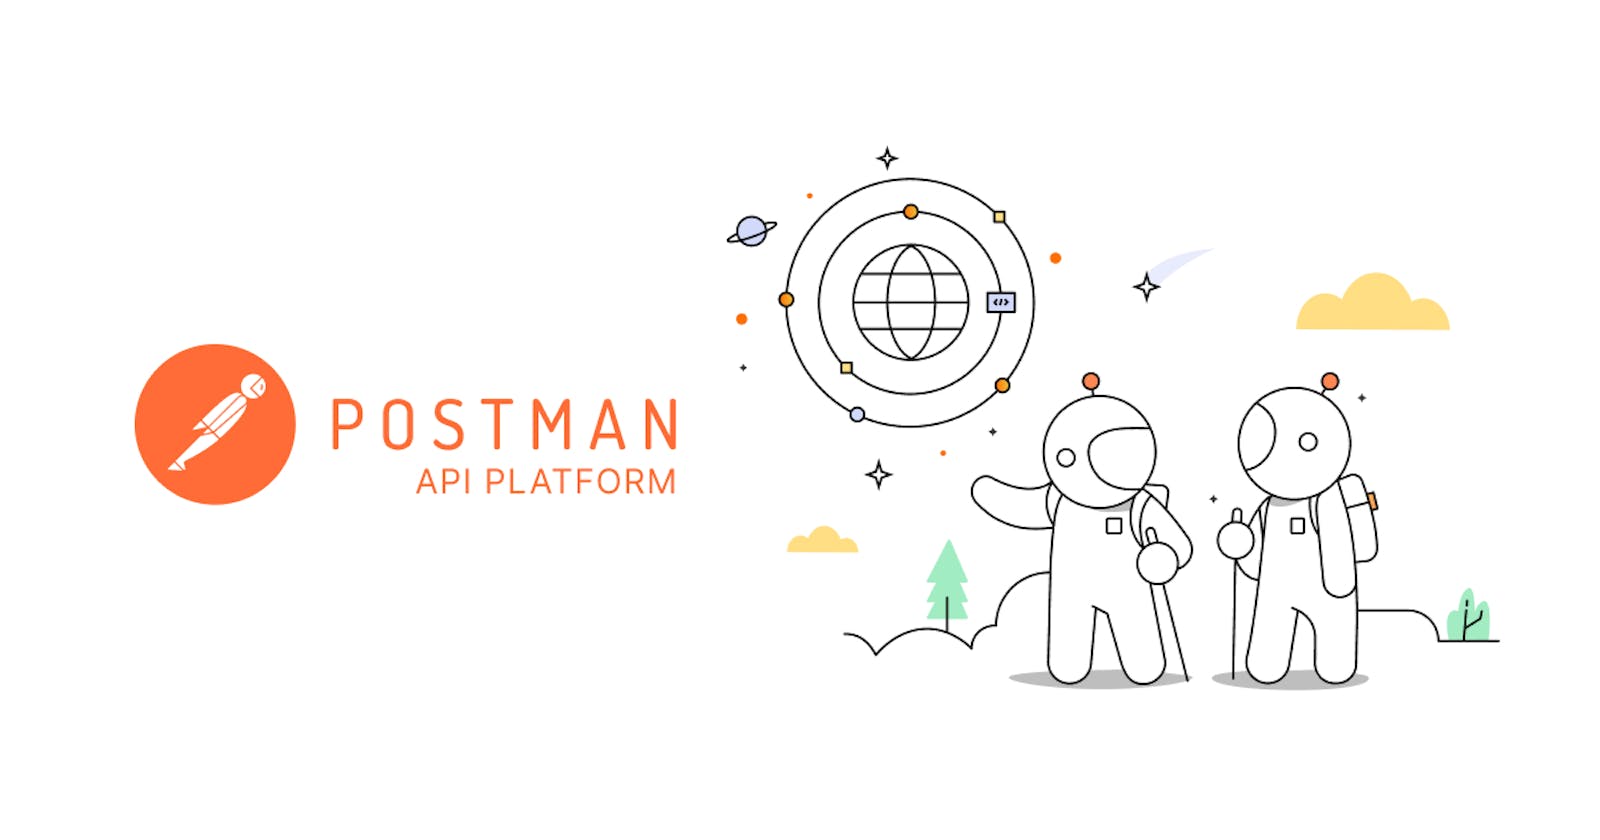 10 Secret Sauce Postman Features for API Development You Didn't Know